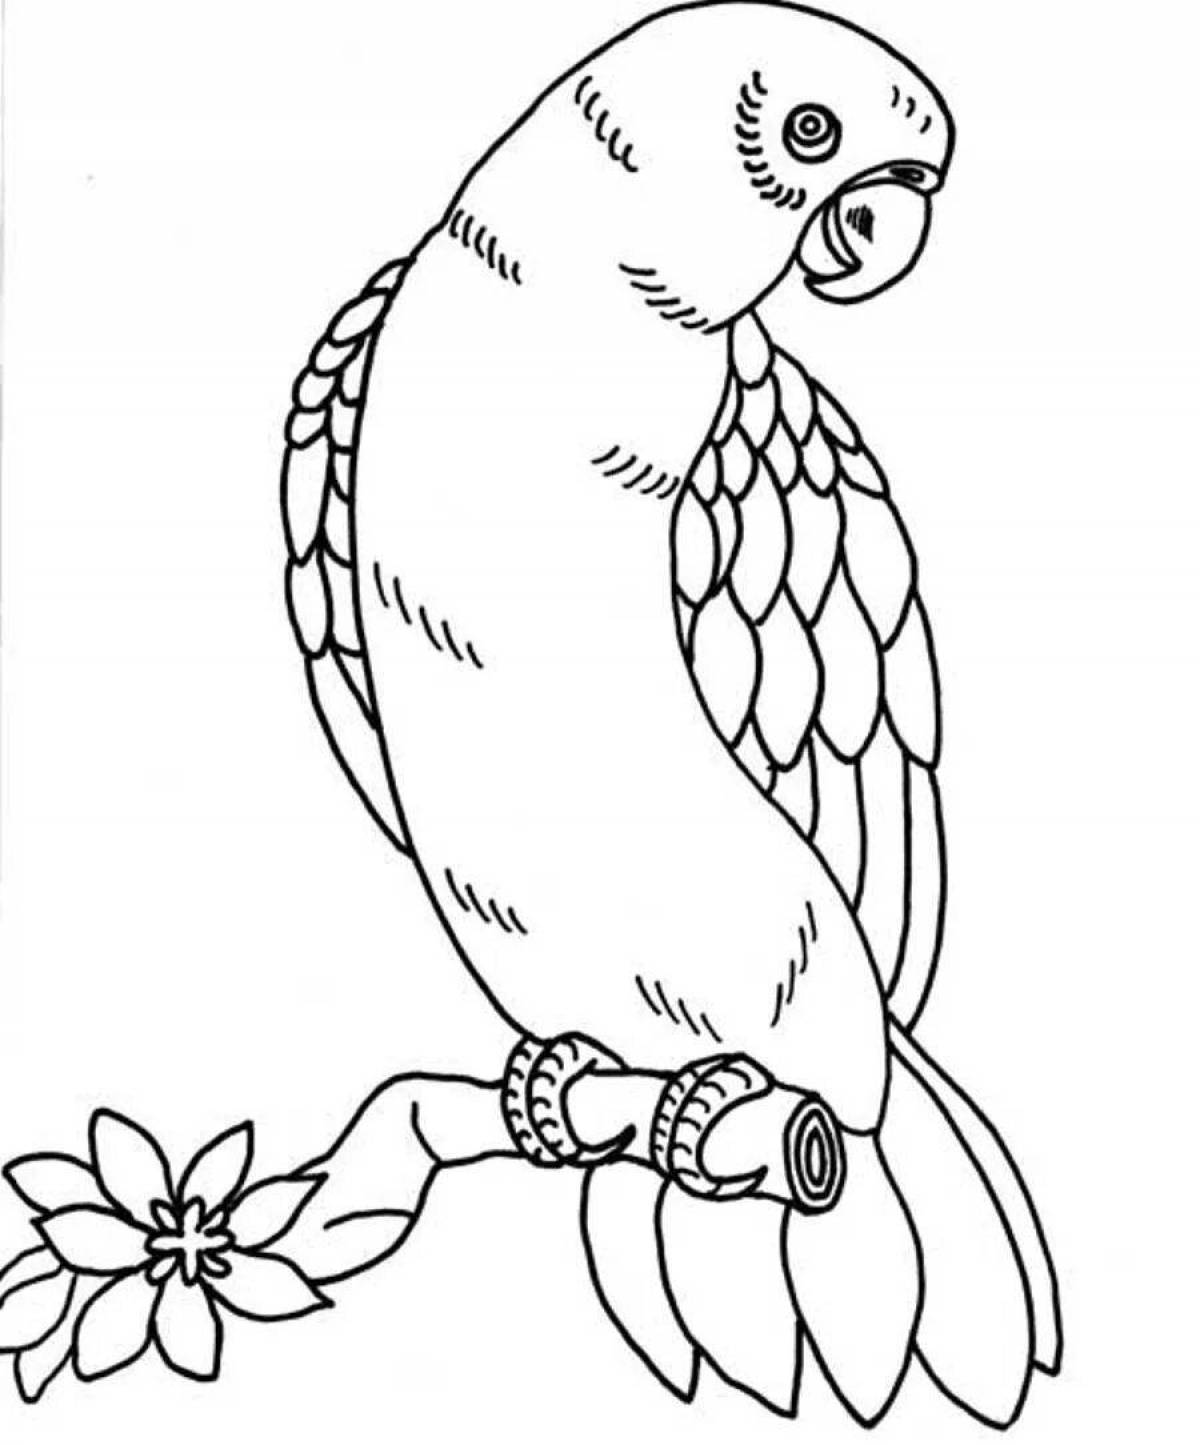 Coloring book cute parrot for children 6-7 years old